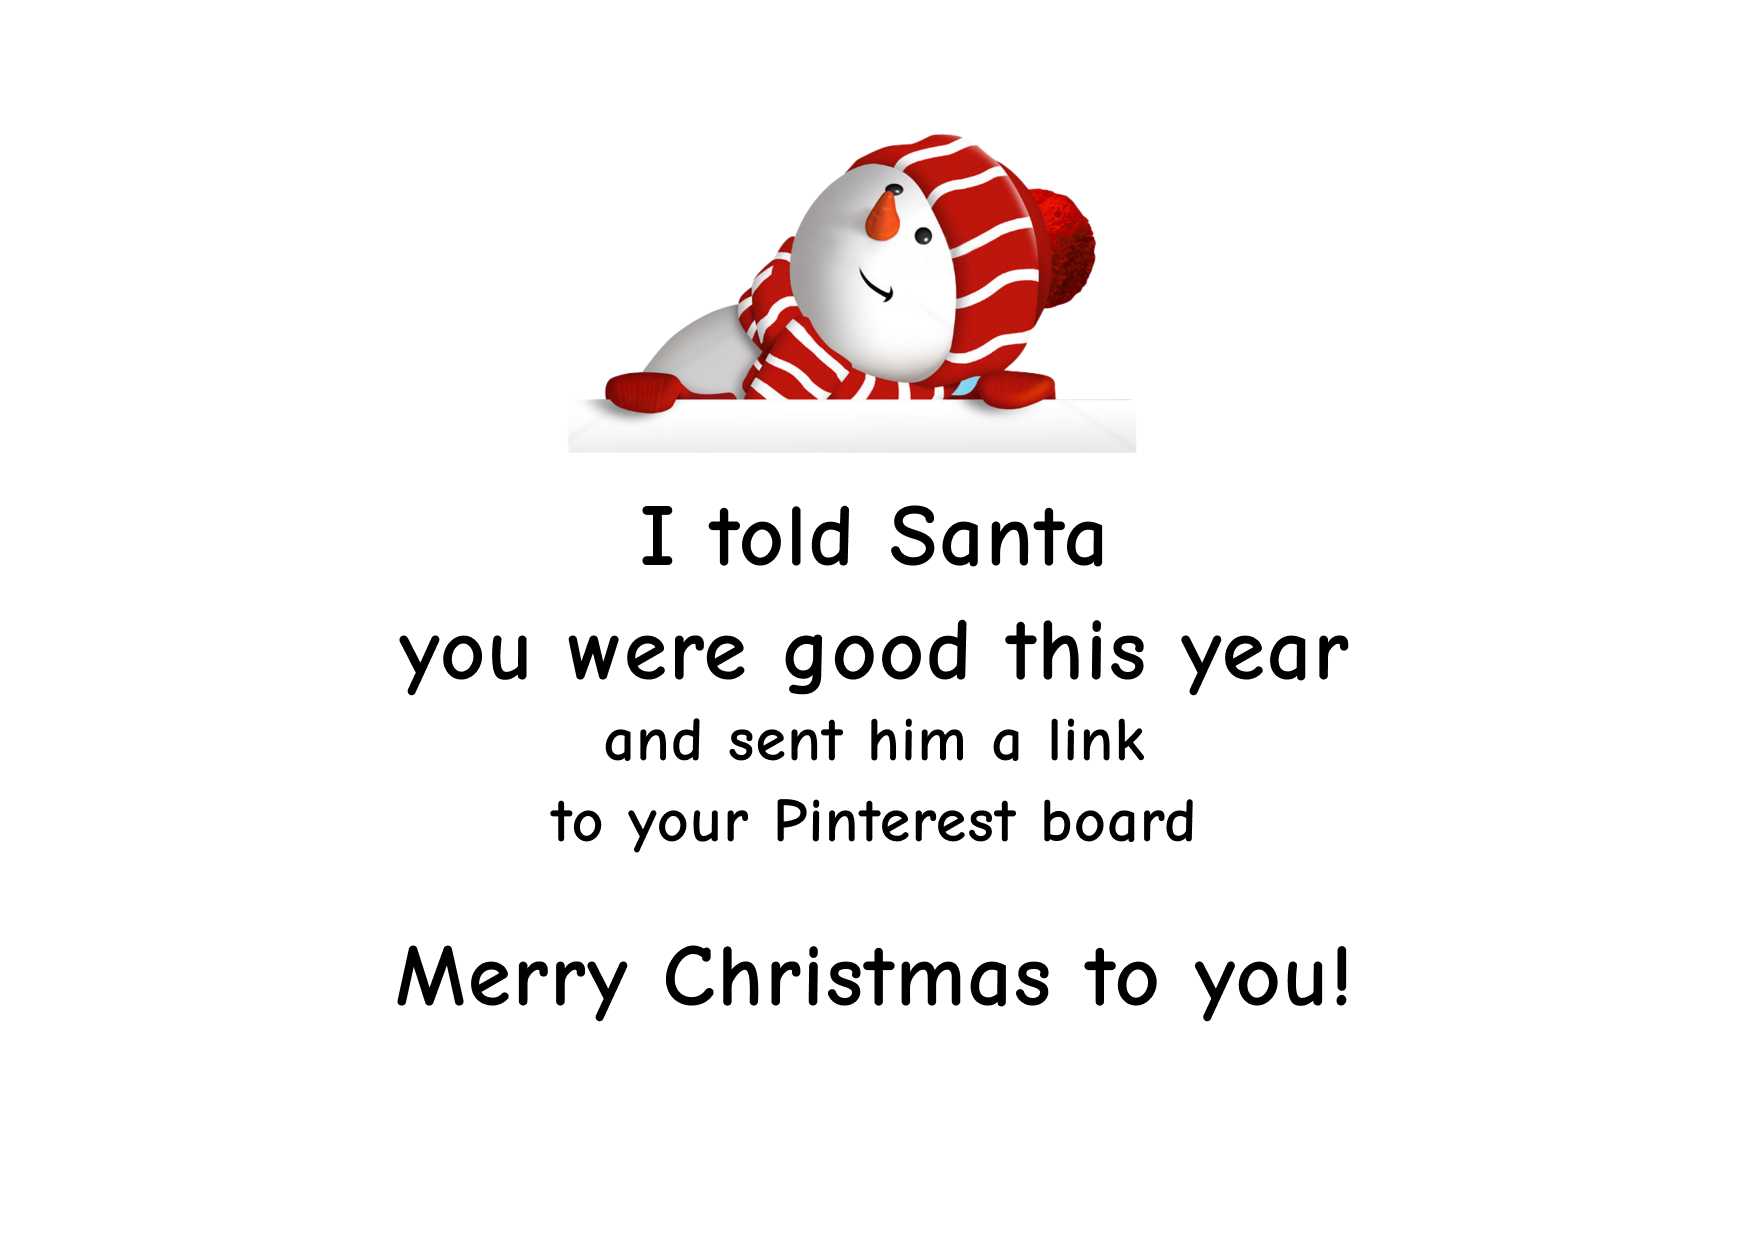 I told Santa you were good this year and sent him a link to your Pinterest board. Merry Christmas to you!